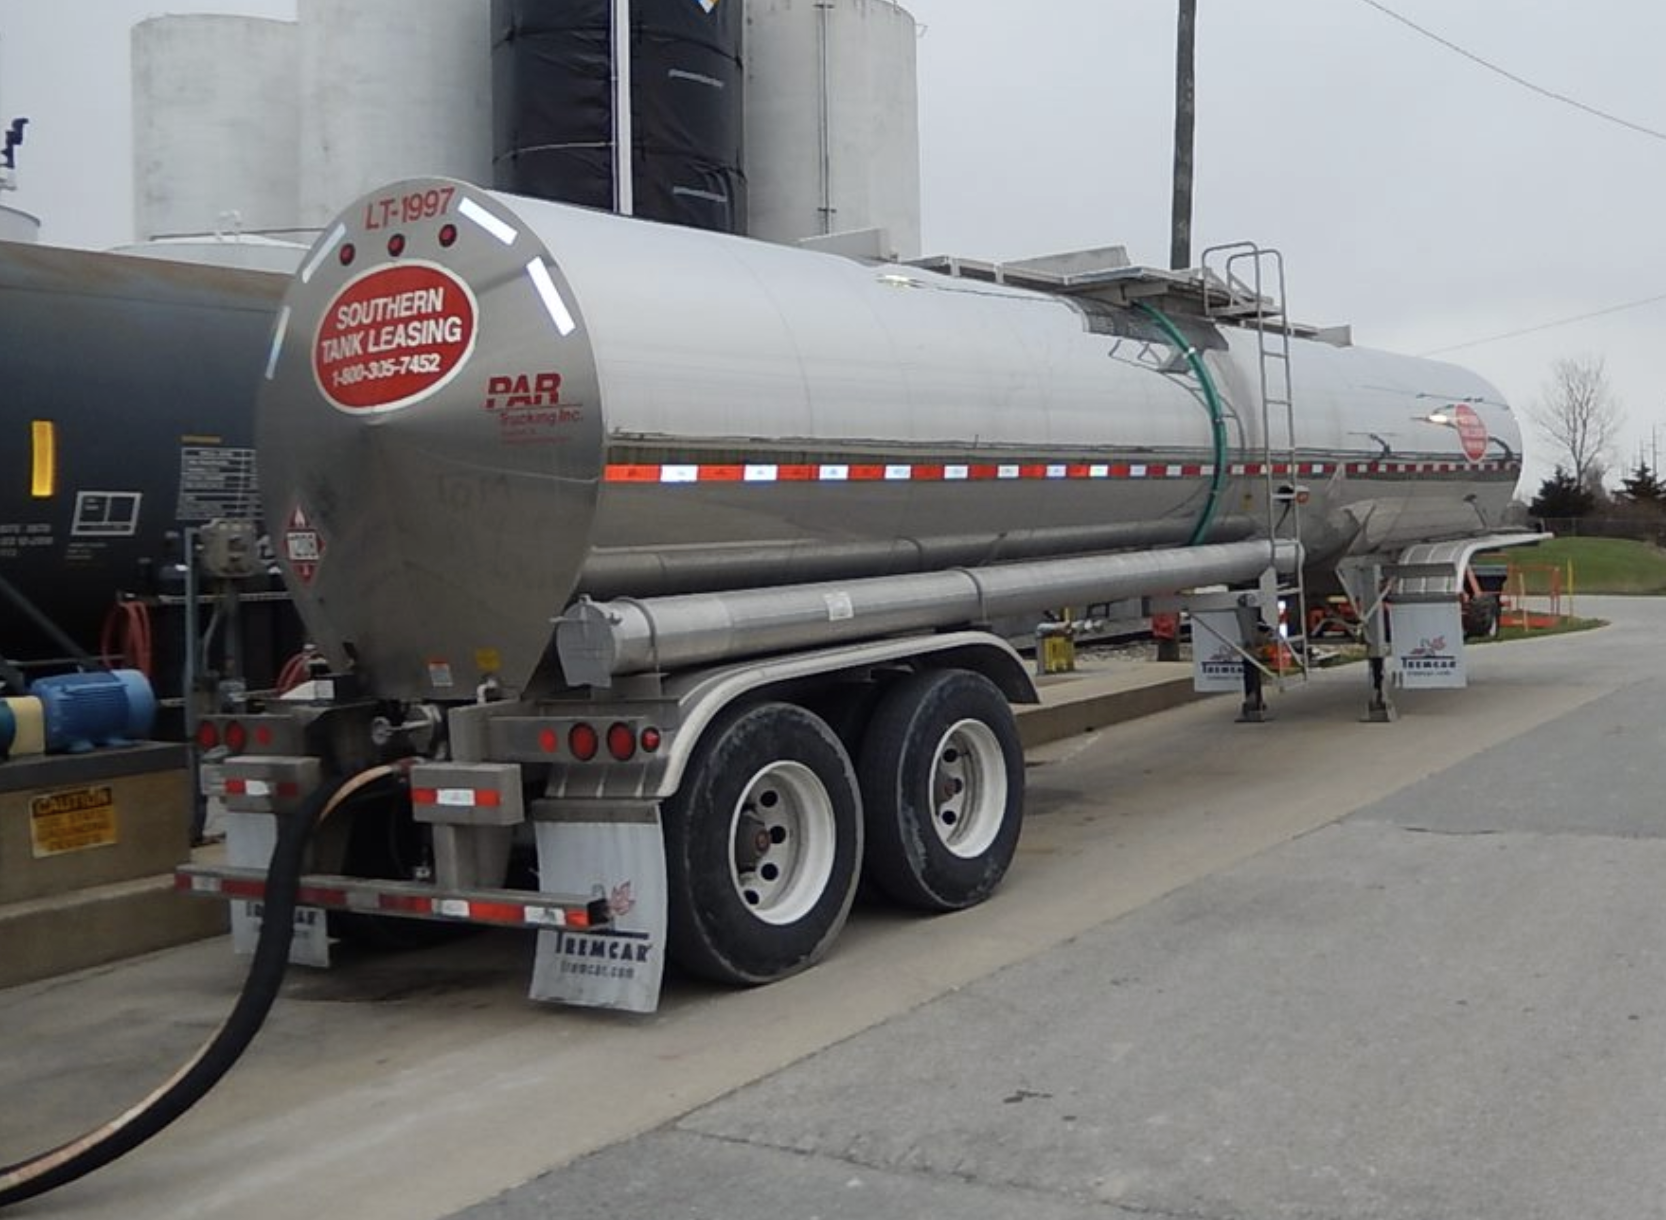 DOT tank vehicles and tank cars are NOT allowed to be used as flammable liquid storage tanks